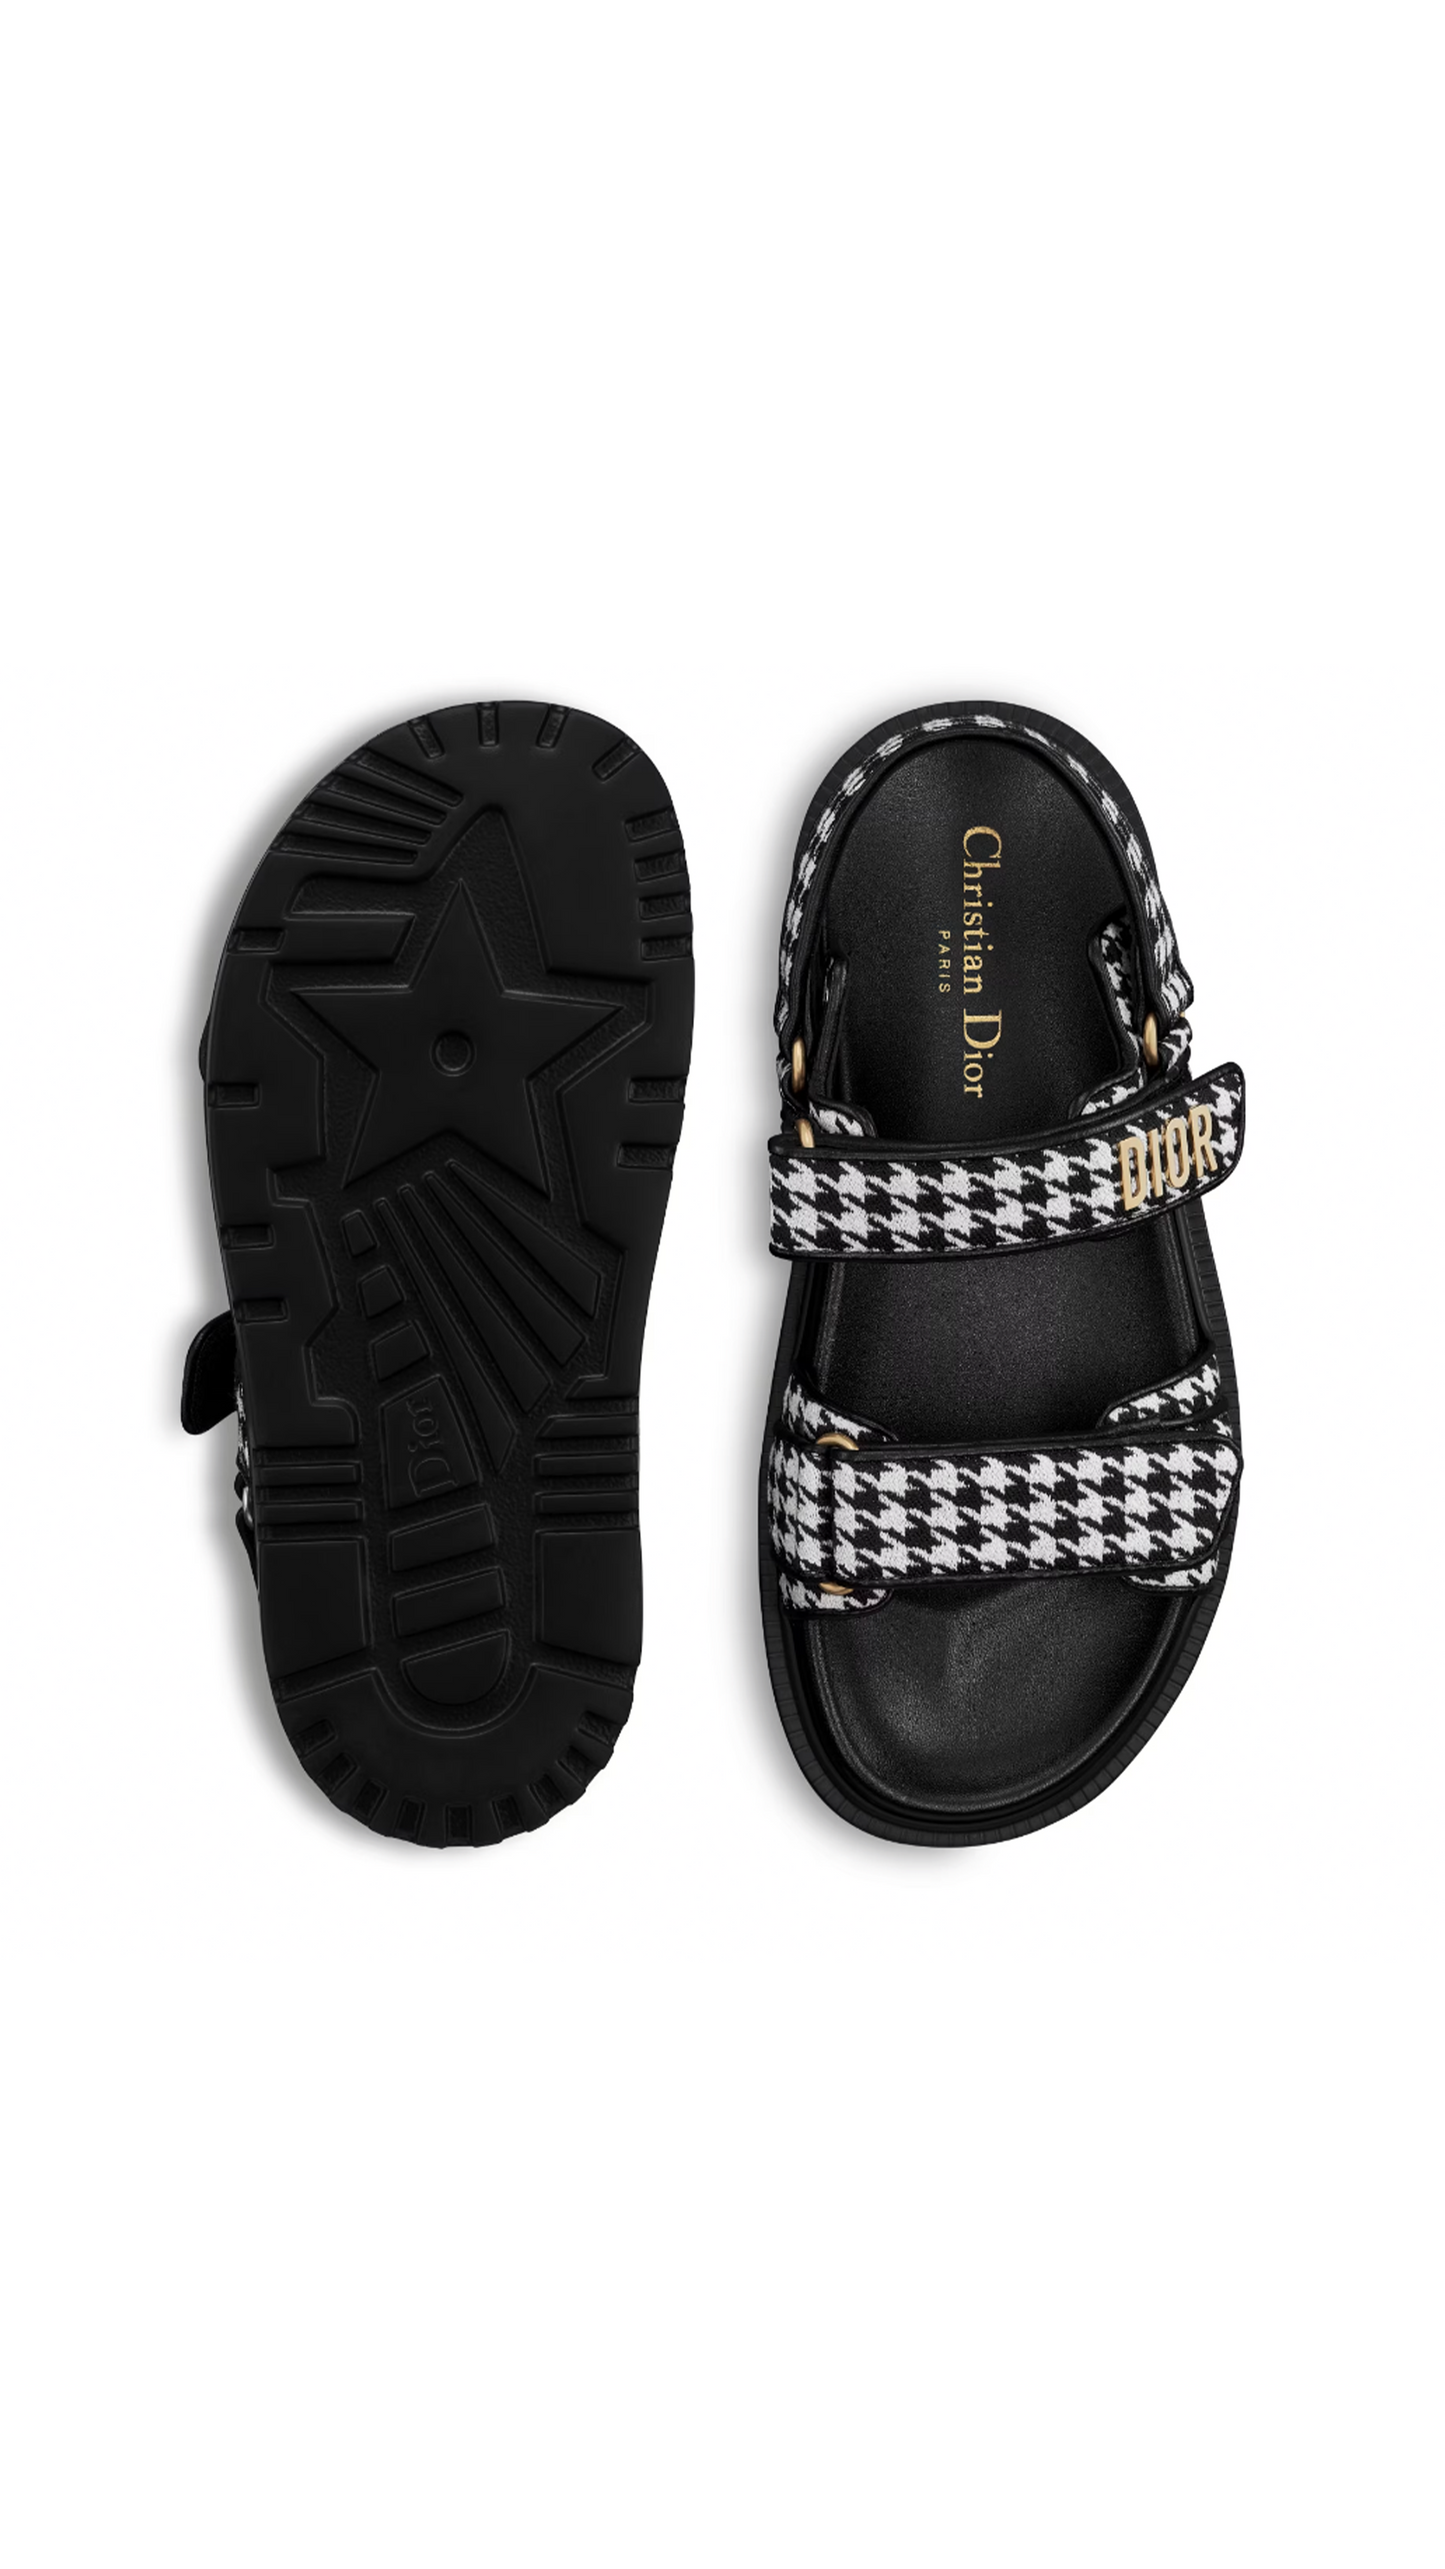 Dioract Micro-Houndstooth Print Sandals - Black/White